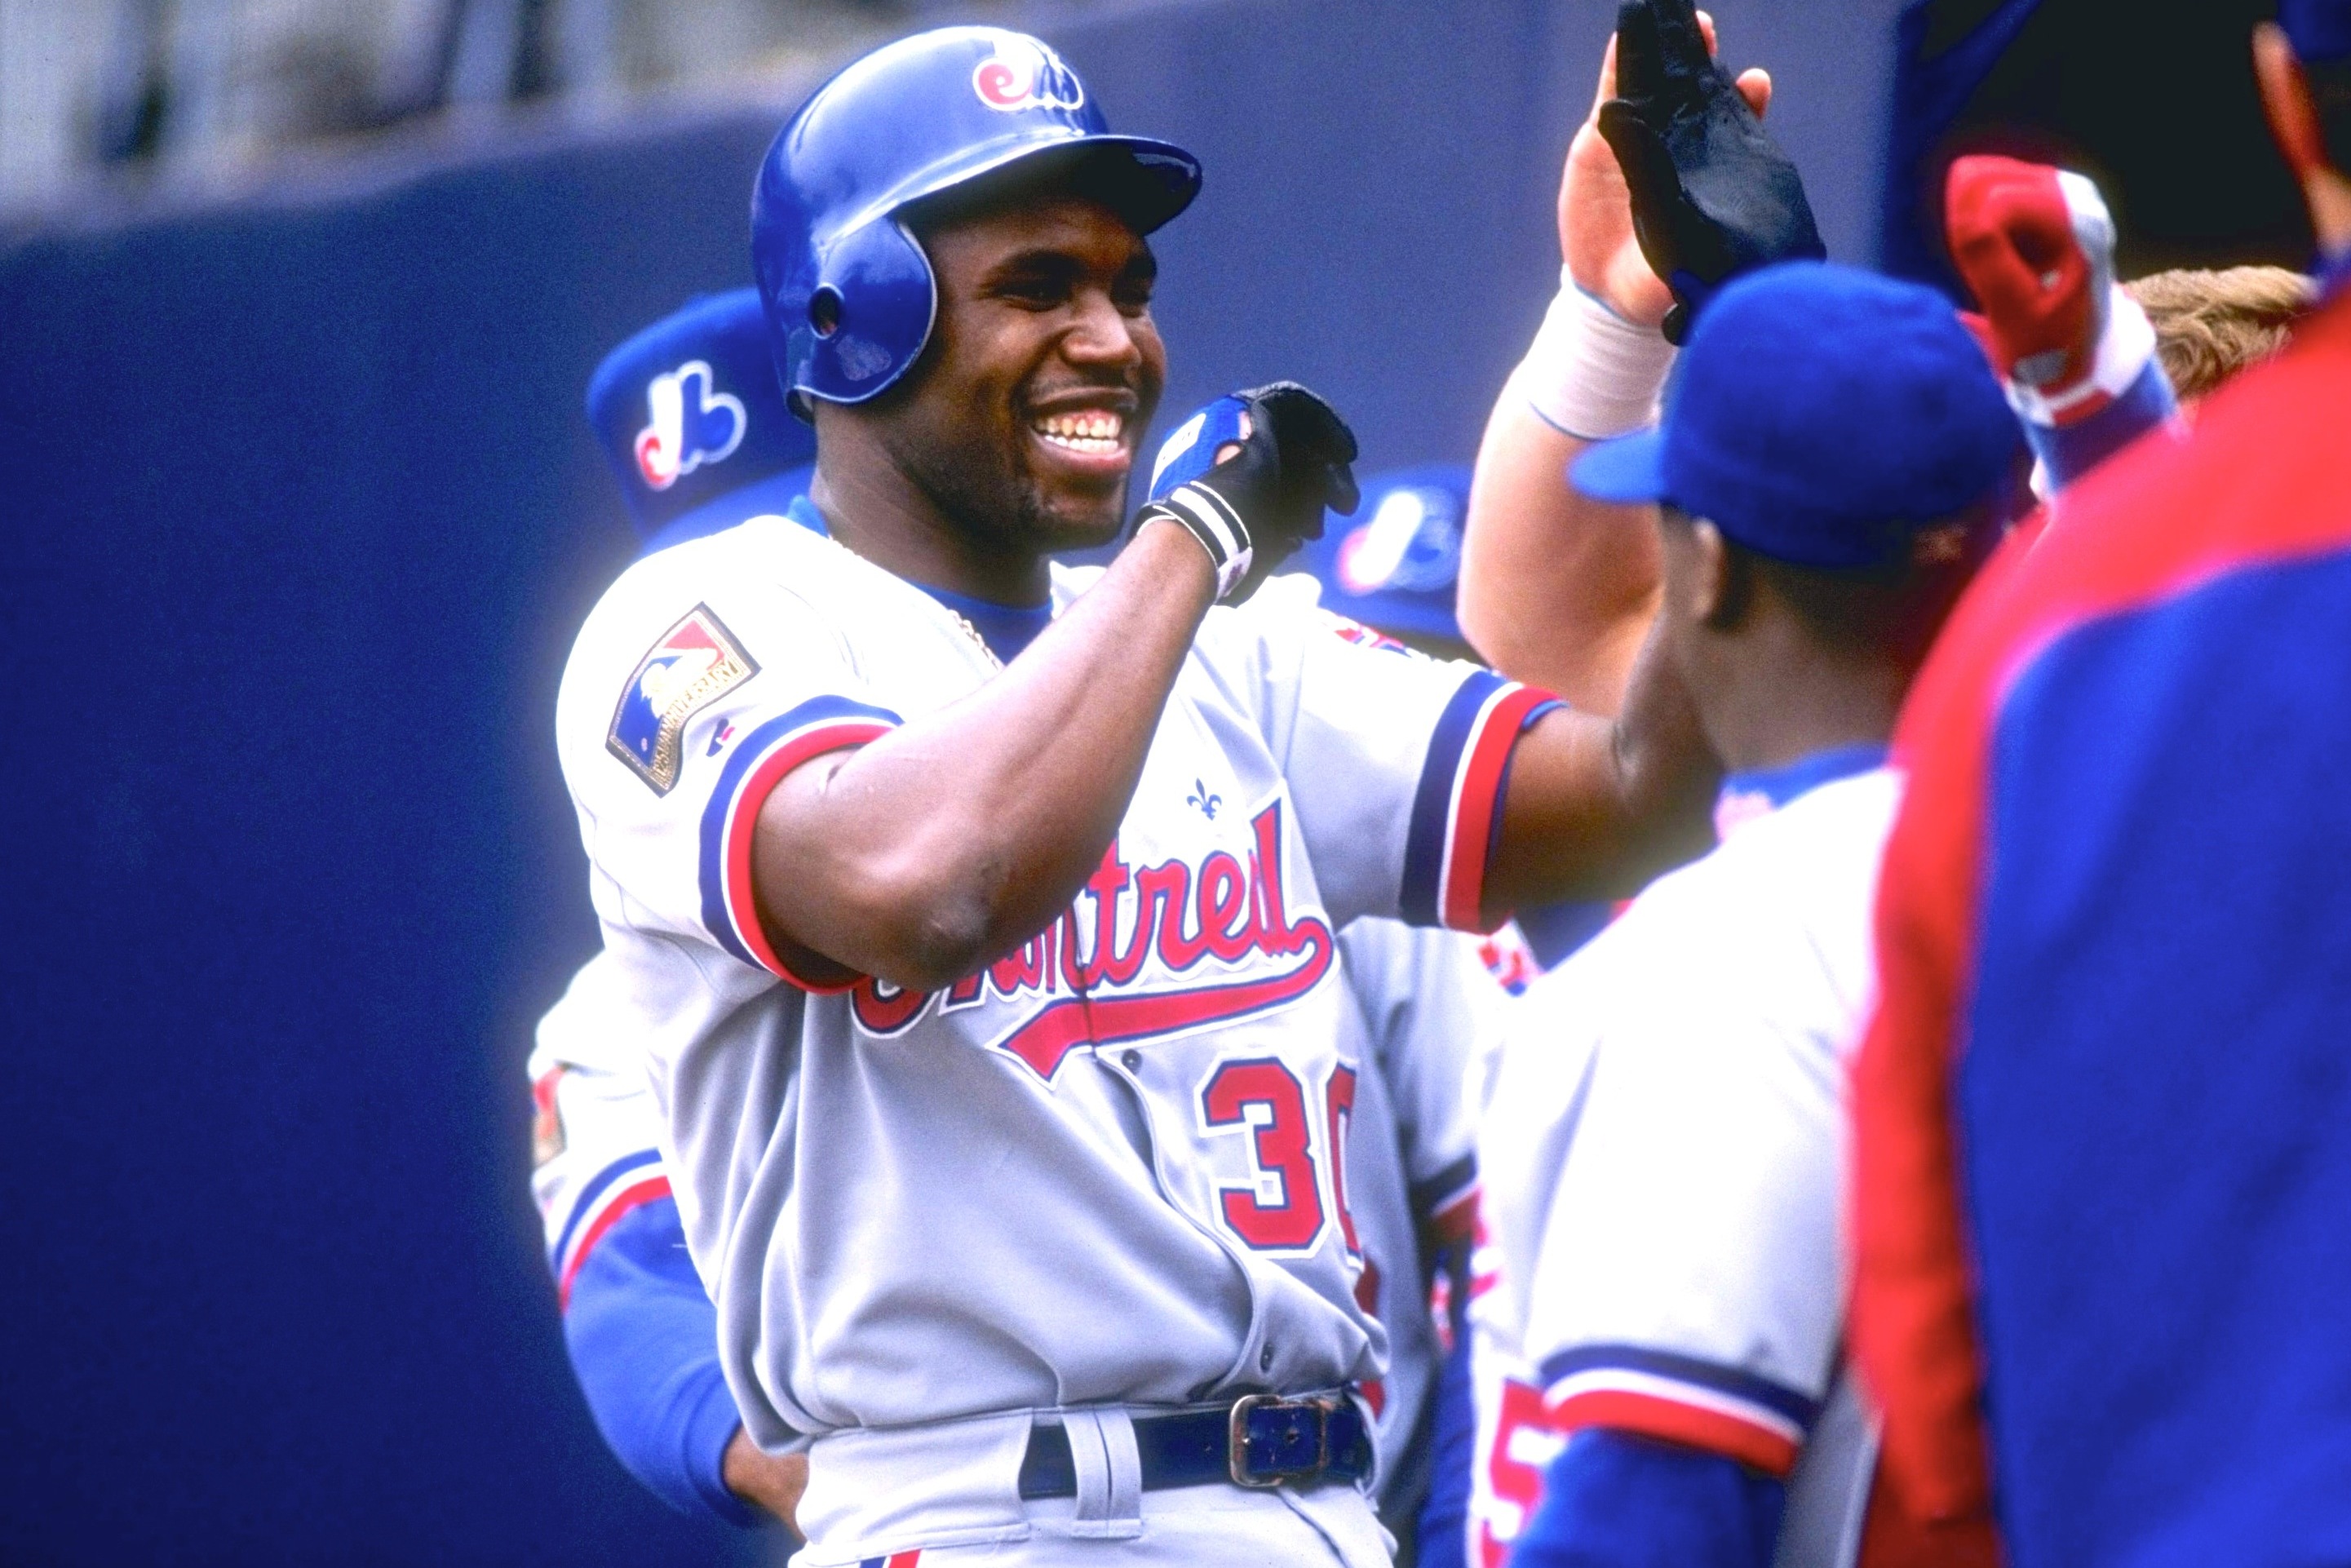 The Montreal Expos are Finally in the World Series